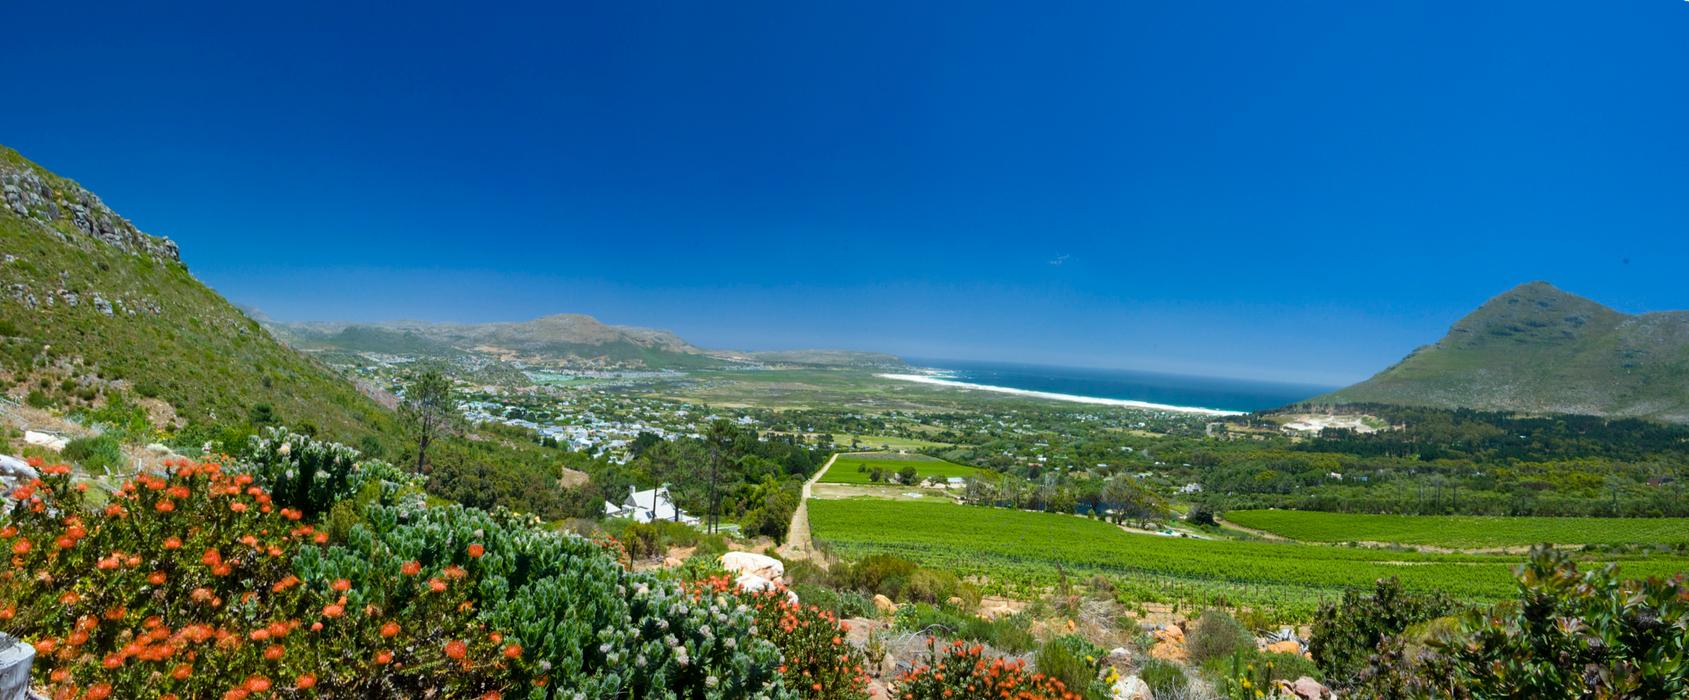 Image 5 from Cape Point Vineyards's image gallery'